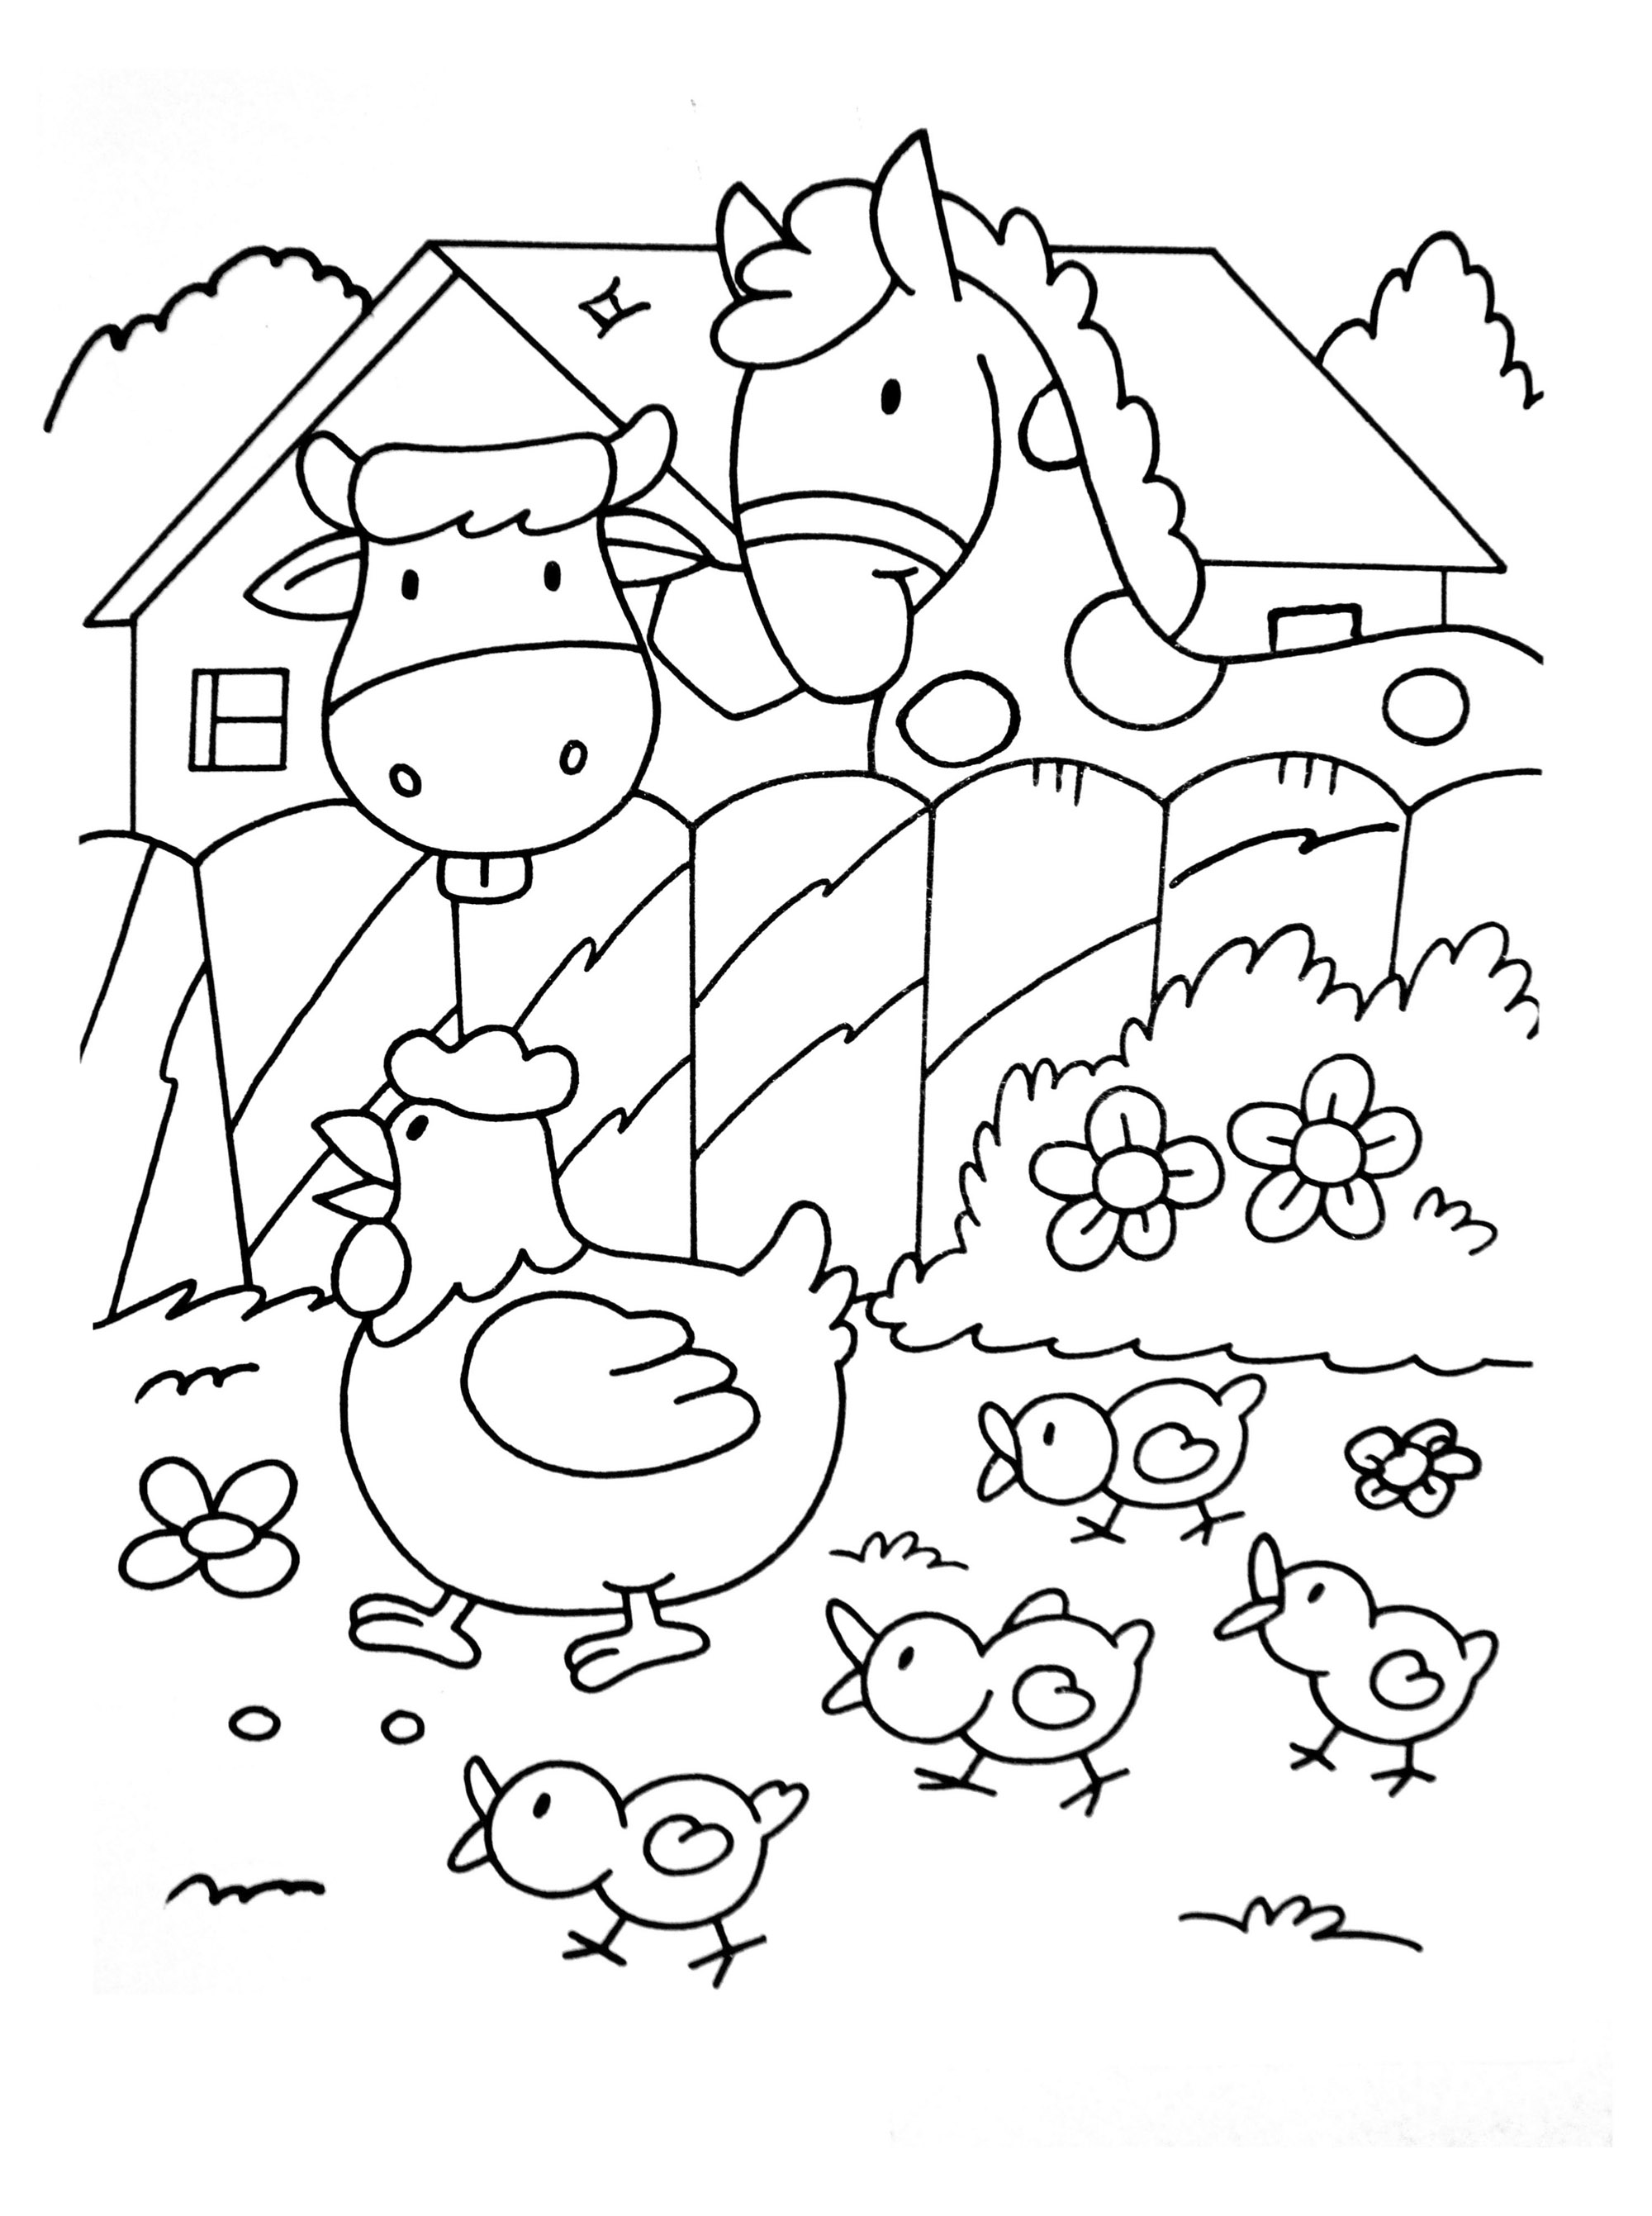 farm aniamal coloring pages